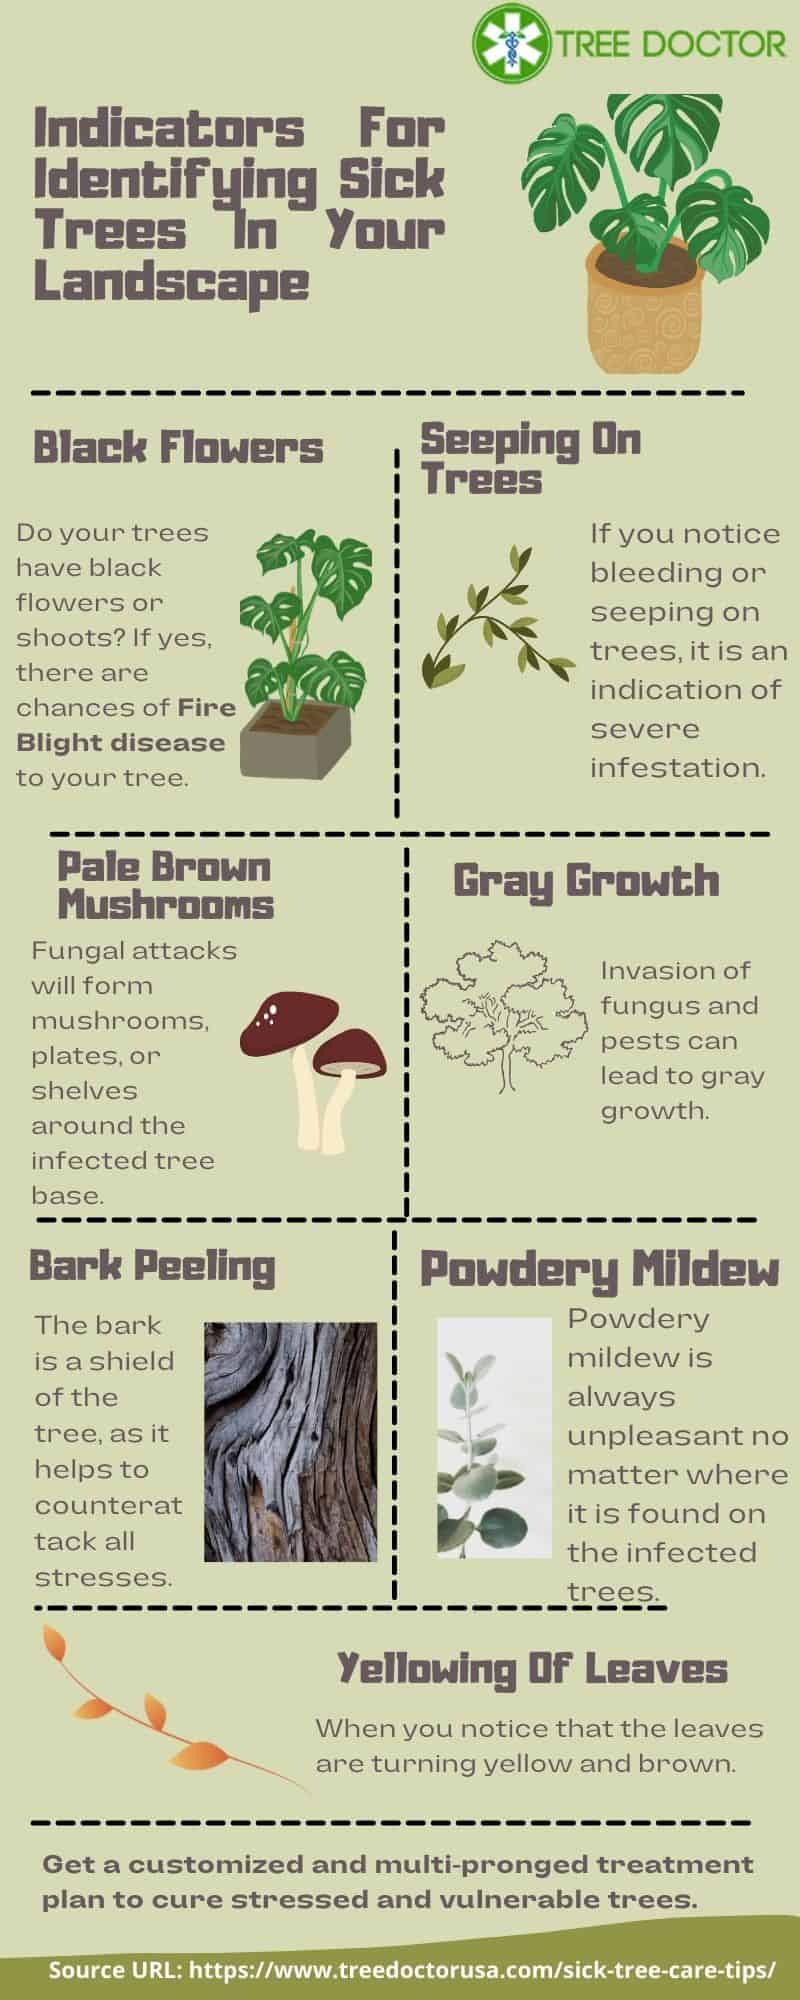 Identifying Sick Trees In Your Landscape